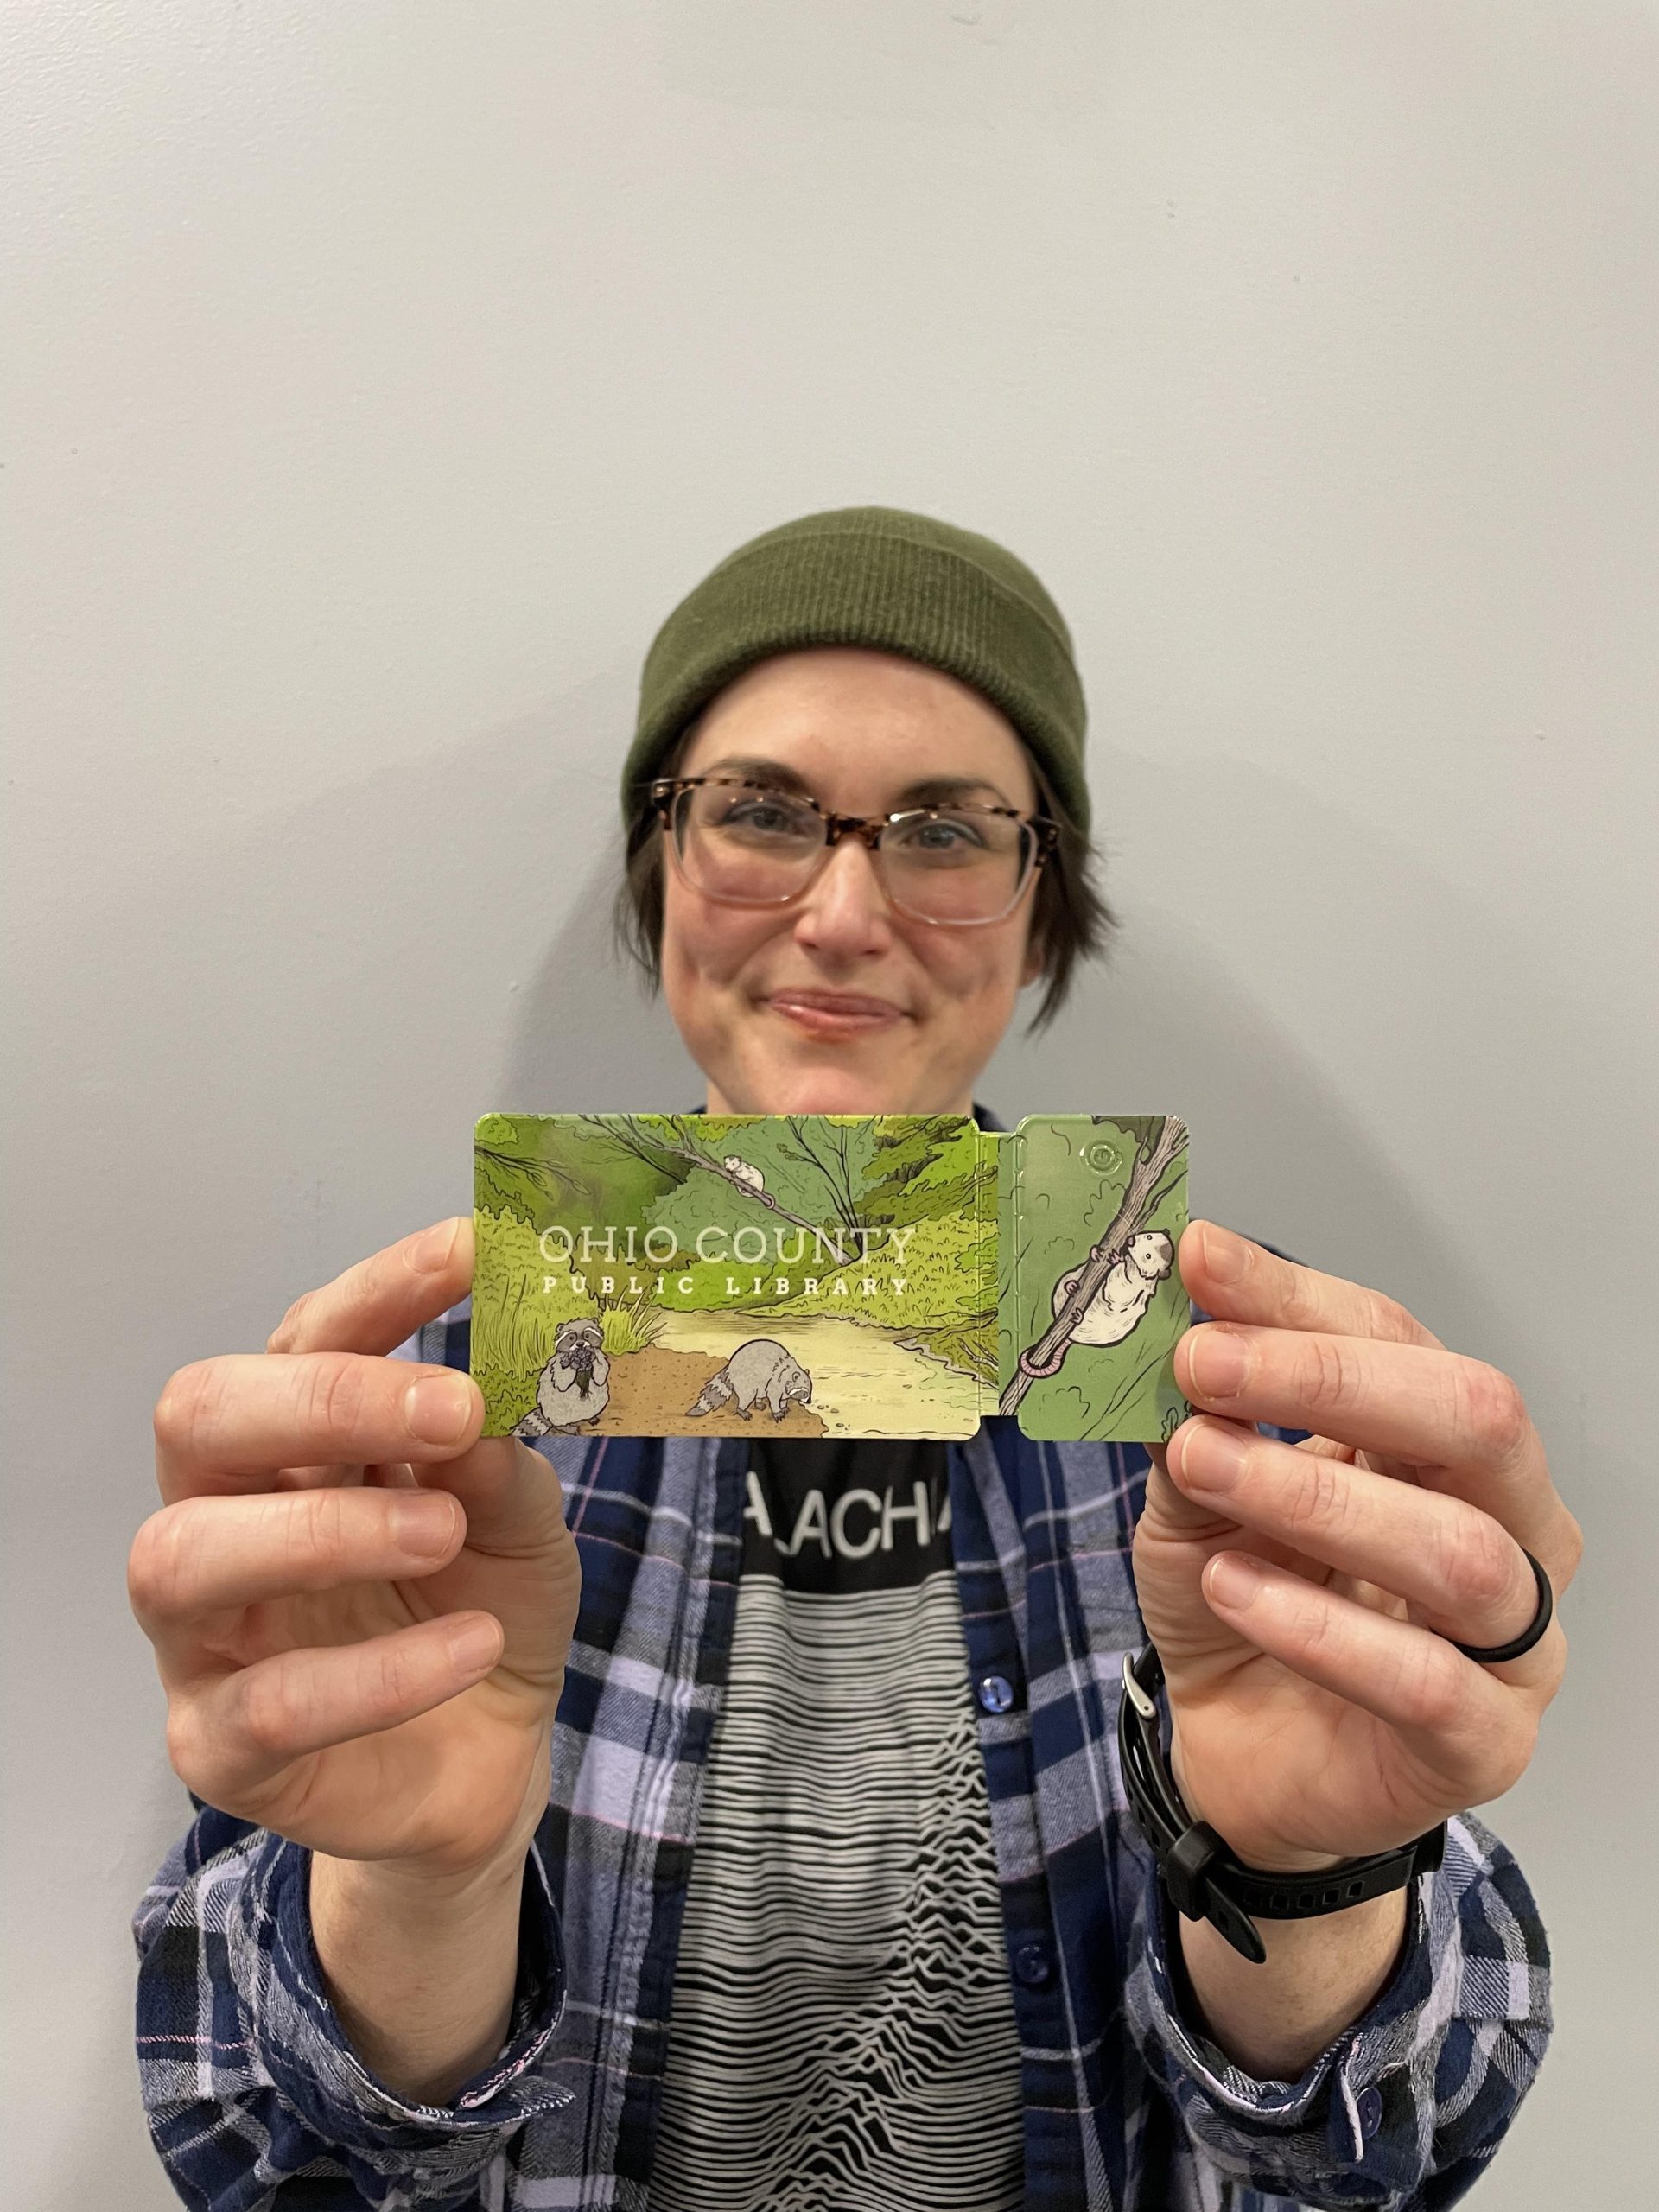 Natalie Kovacs with the card she designed for the Ohio County Public Library.